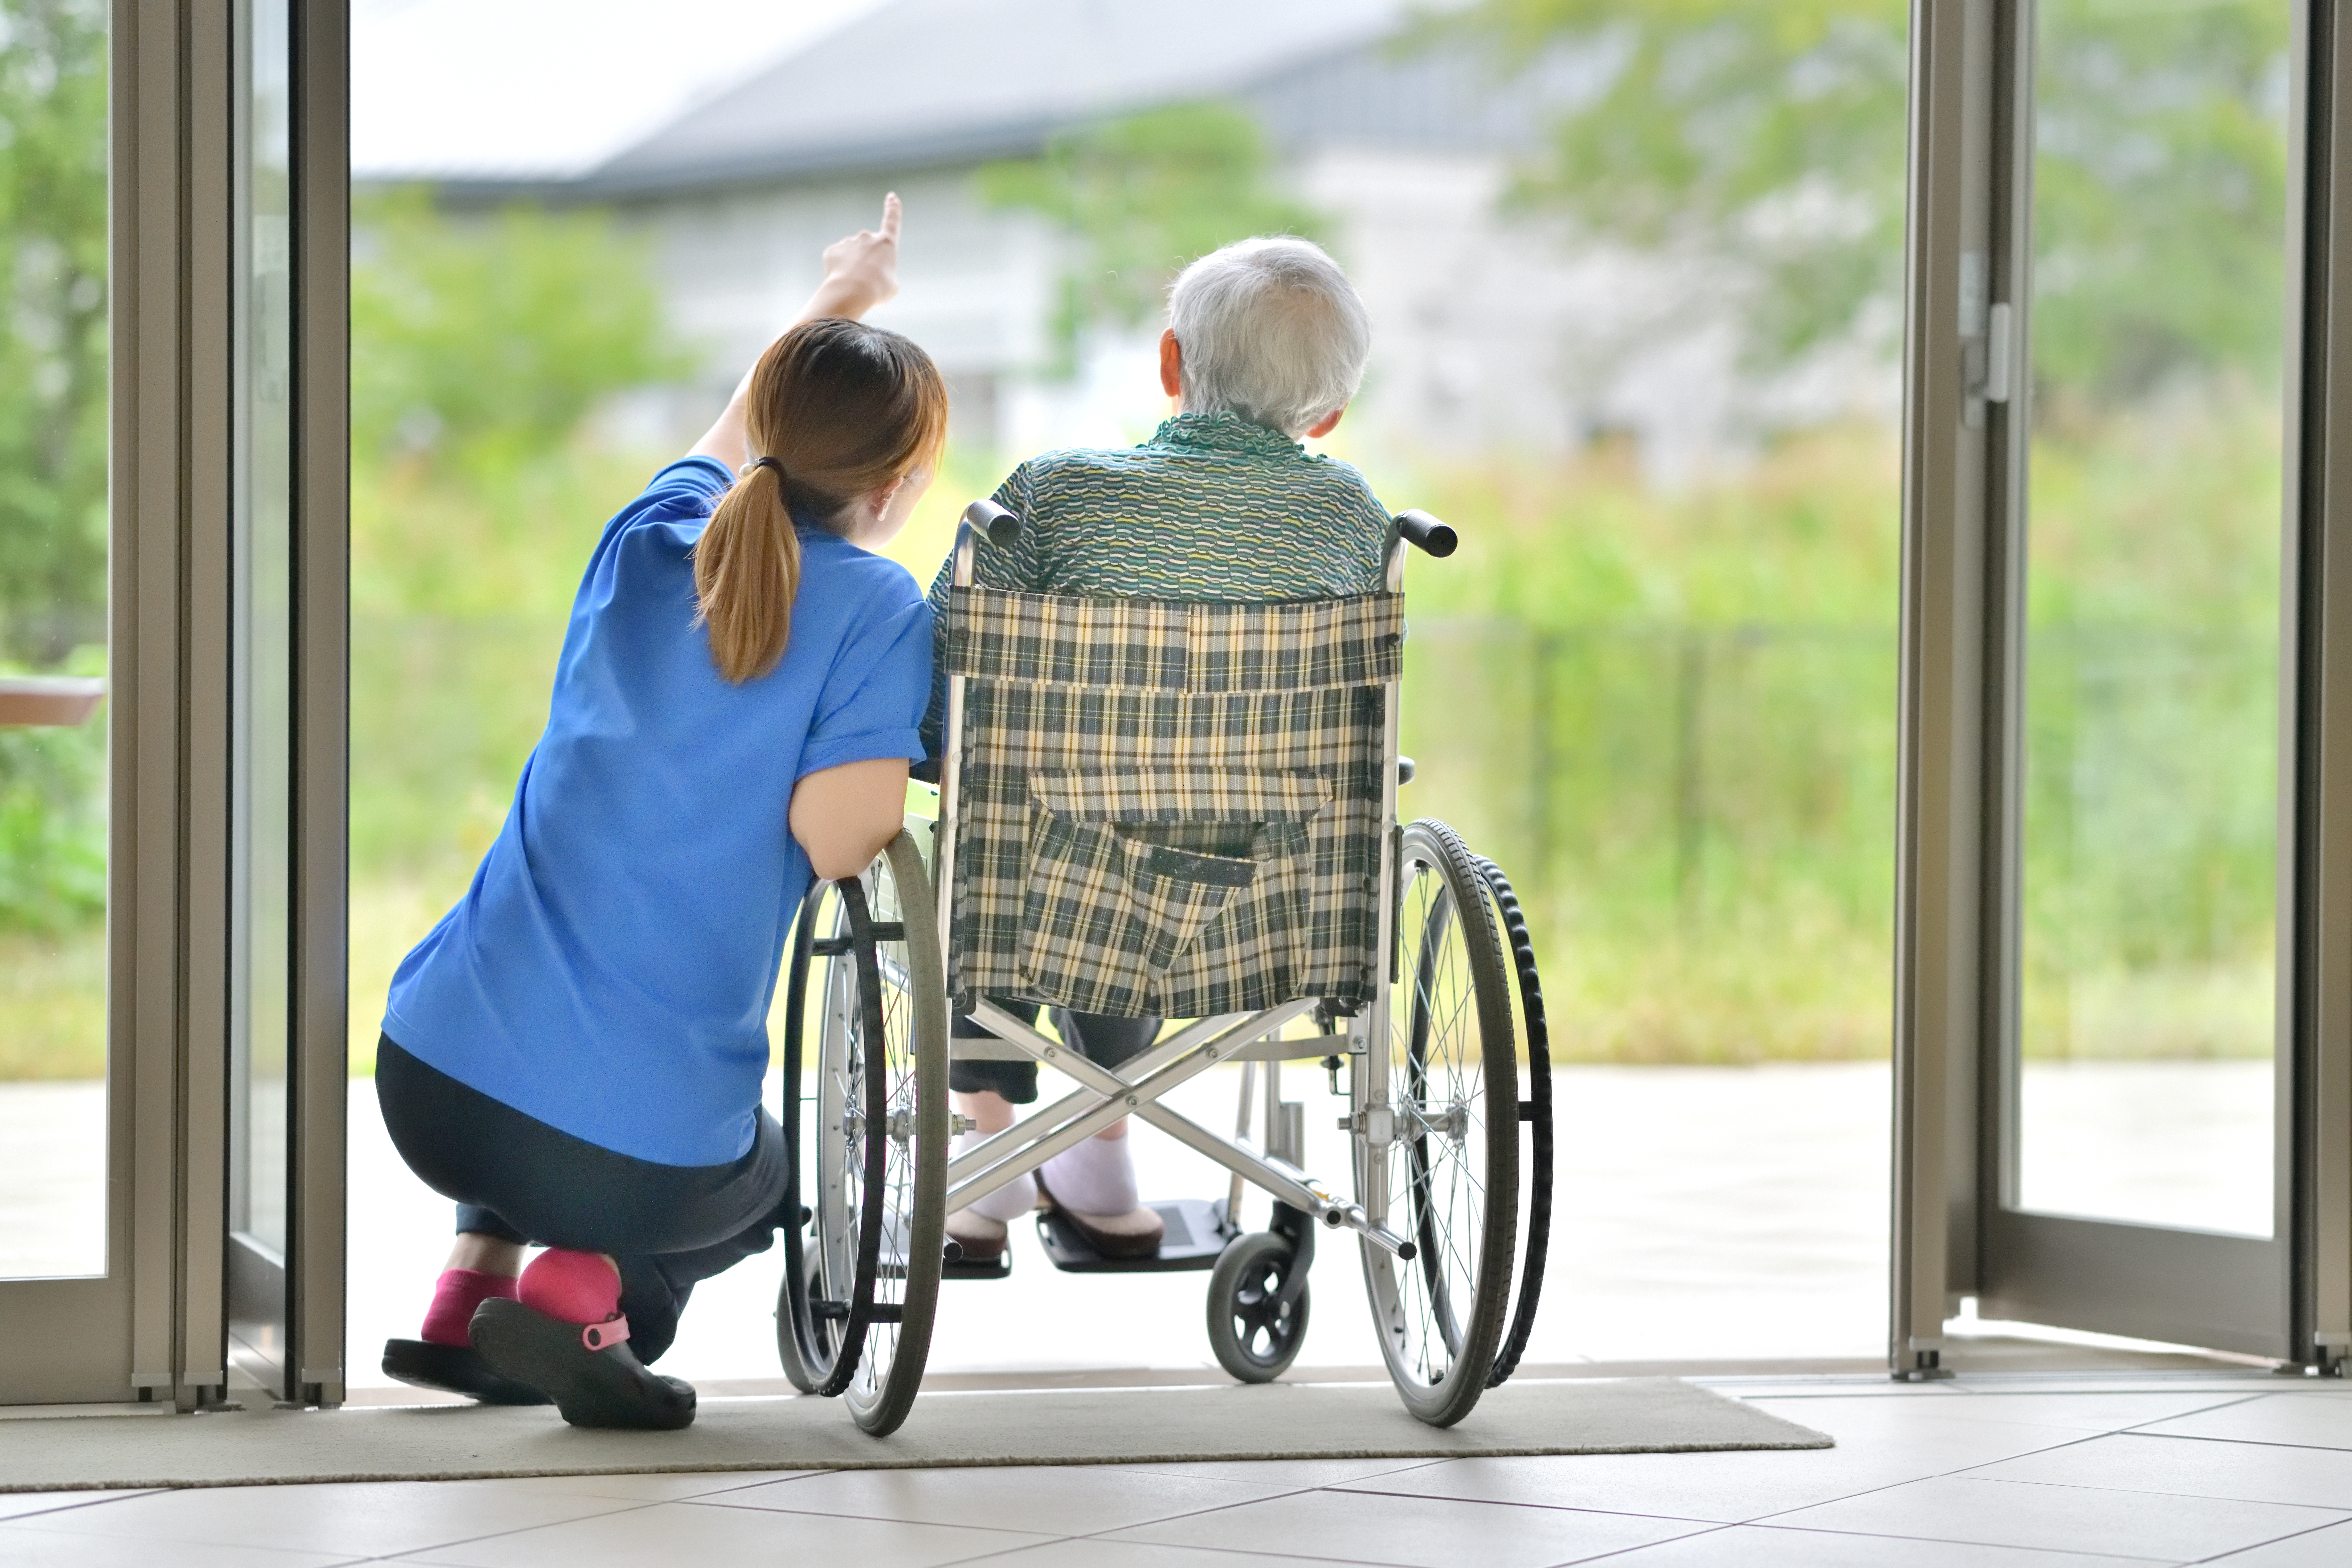 Nurse and patient, in wheelchair, looking outside to nature.